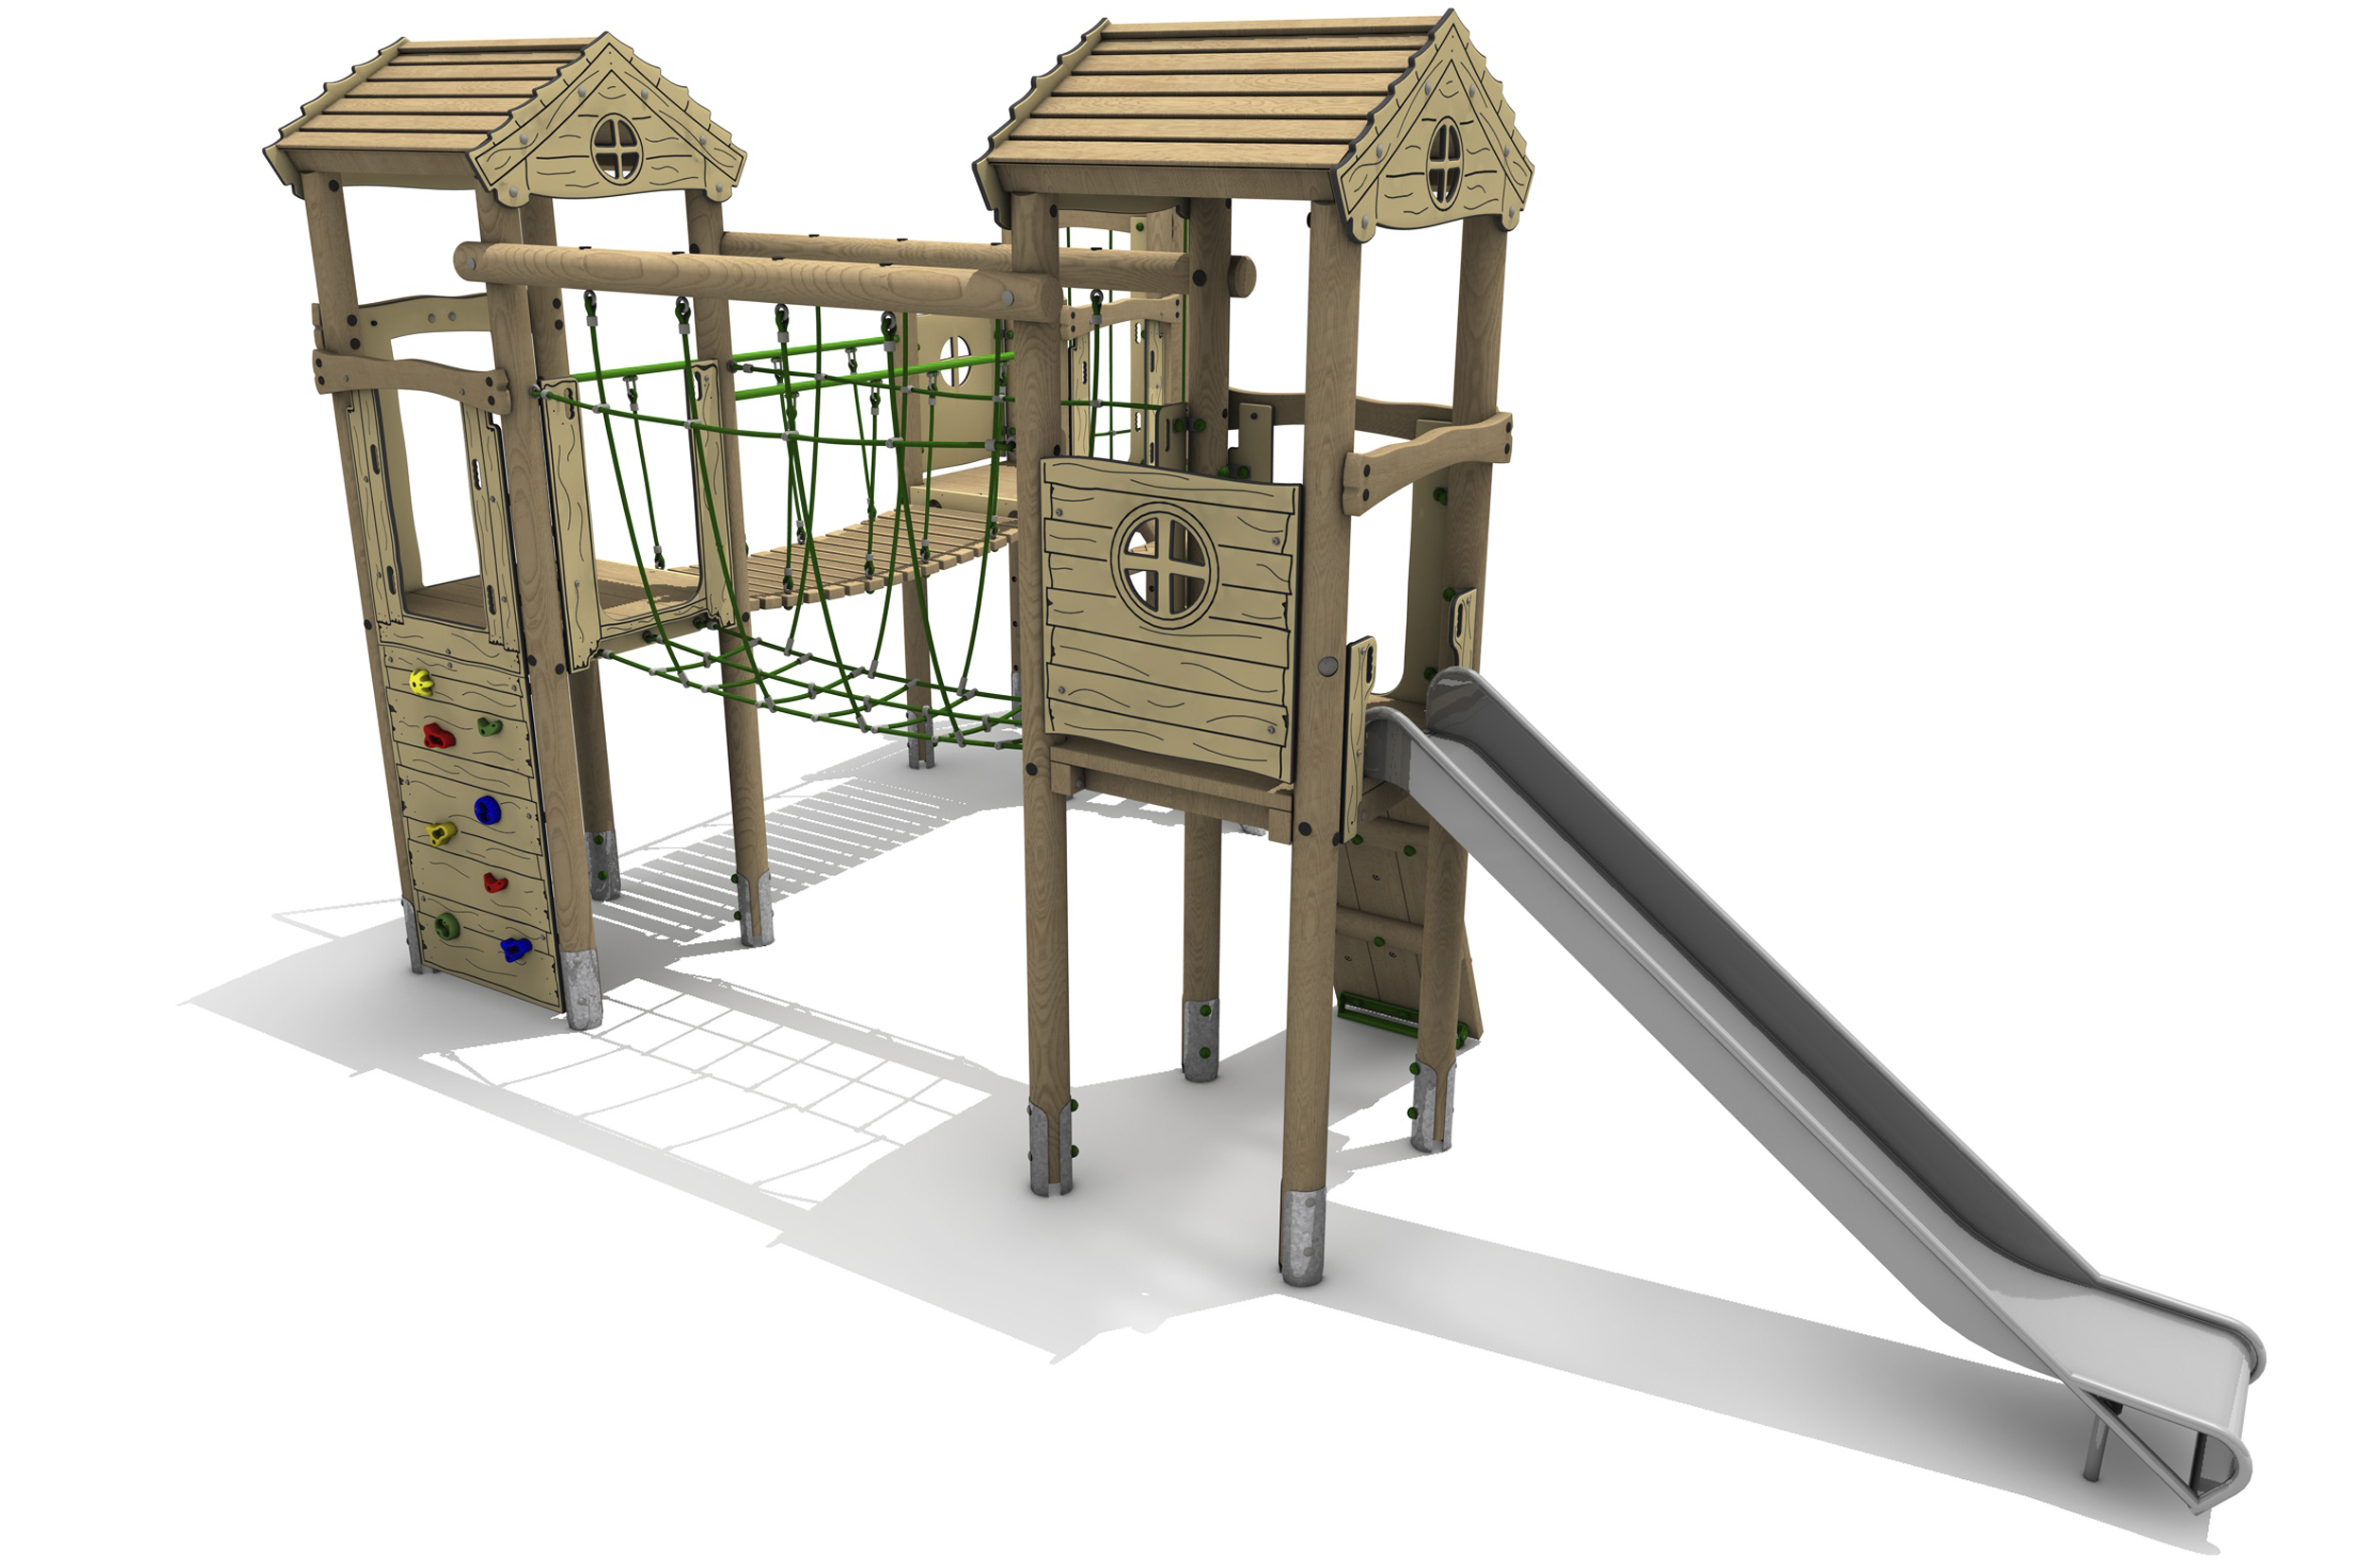 Timber Tower Triple Deck 04, A timber tower climber with steel slide. There is a platform on the left with a roof and a vertical climb wall with multicoloured hand and foot holds. There is a green net bridge linking to the platform on the right. This platform has a roof and a steel slide.